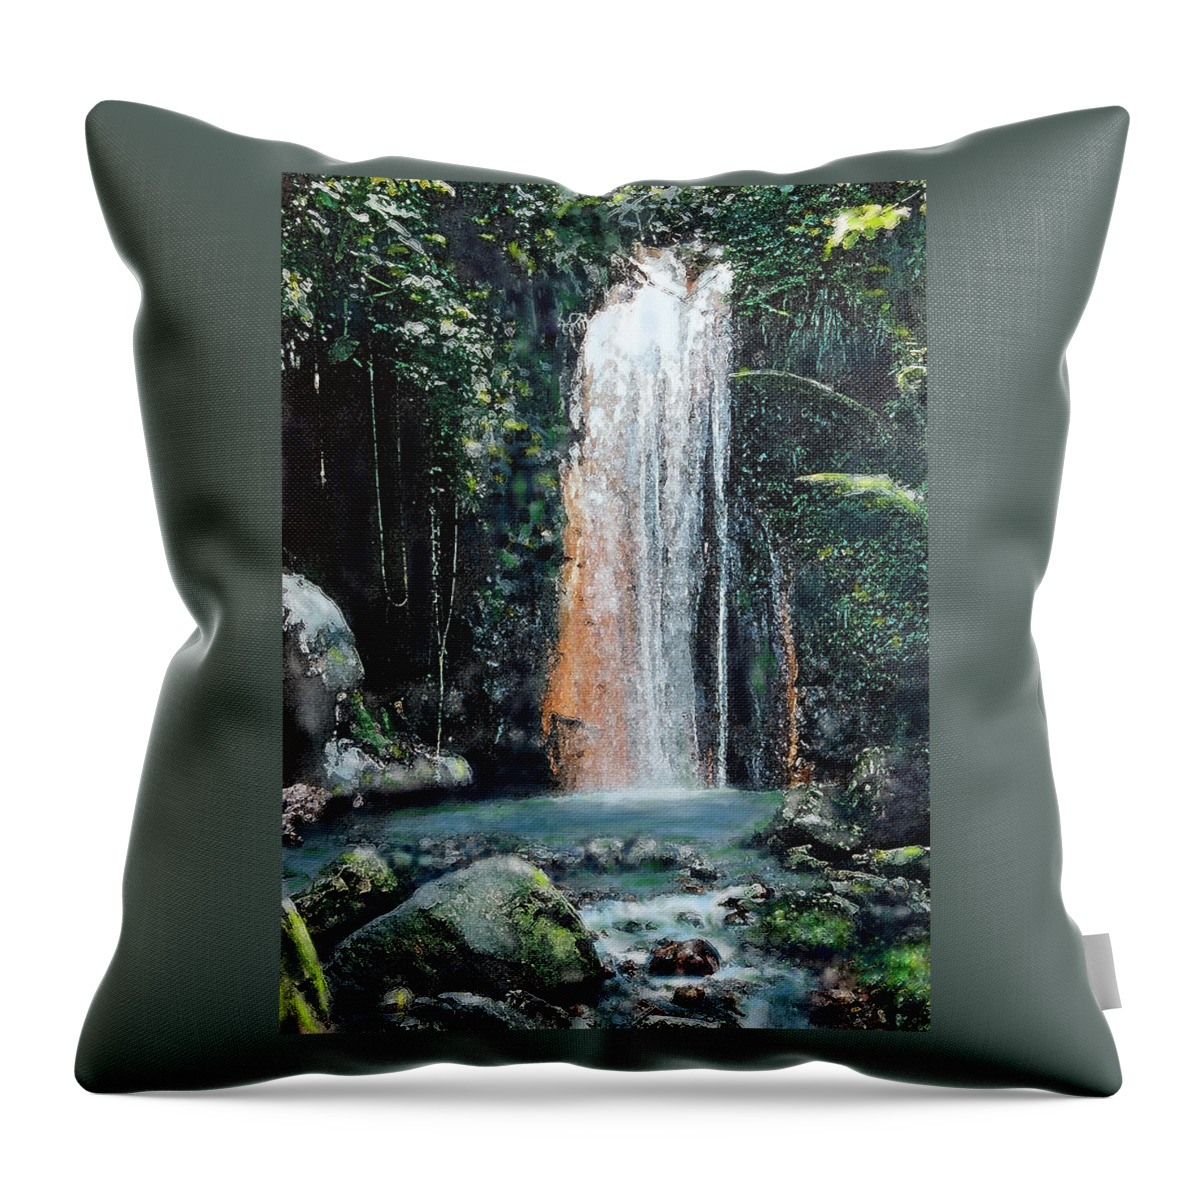 Water Throw Pillow featuring the digital art Paradise Found by Ian MacDonald